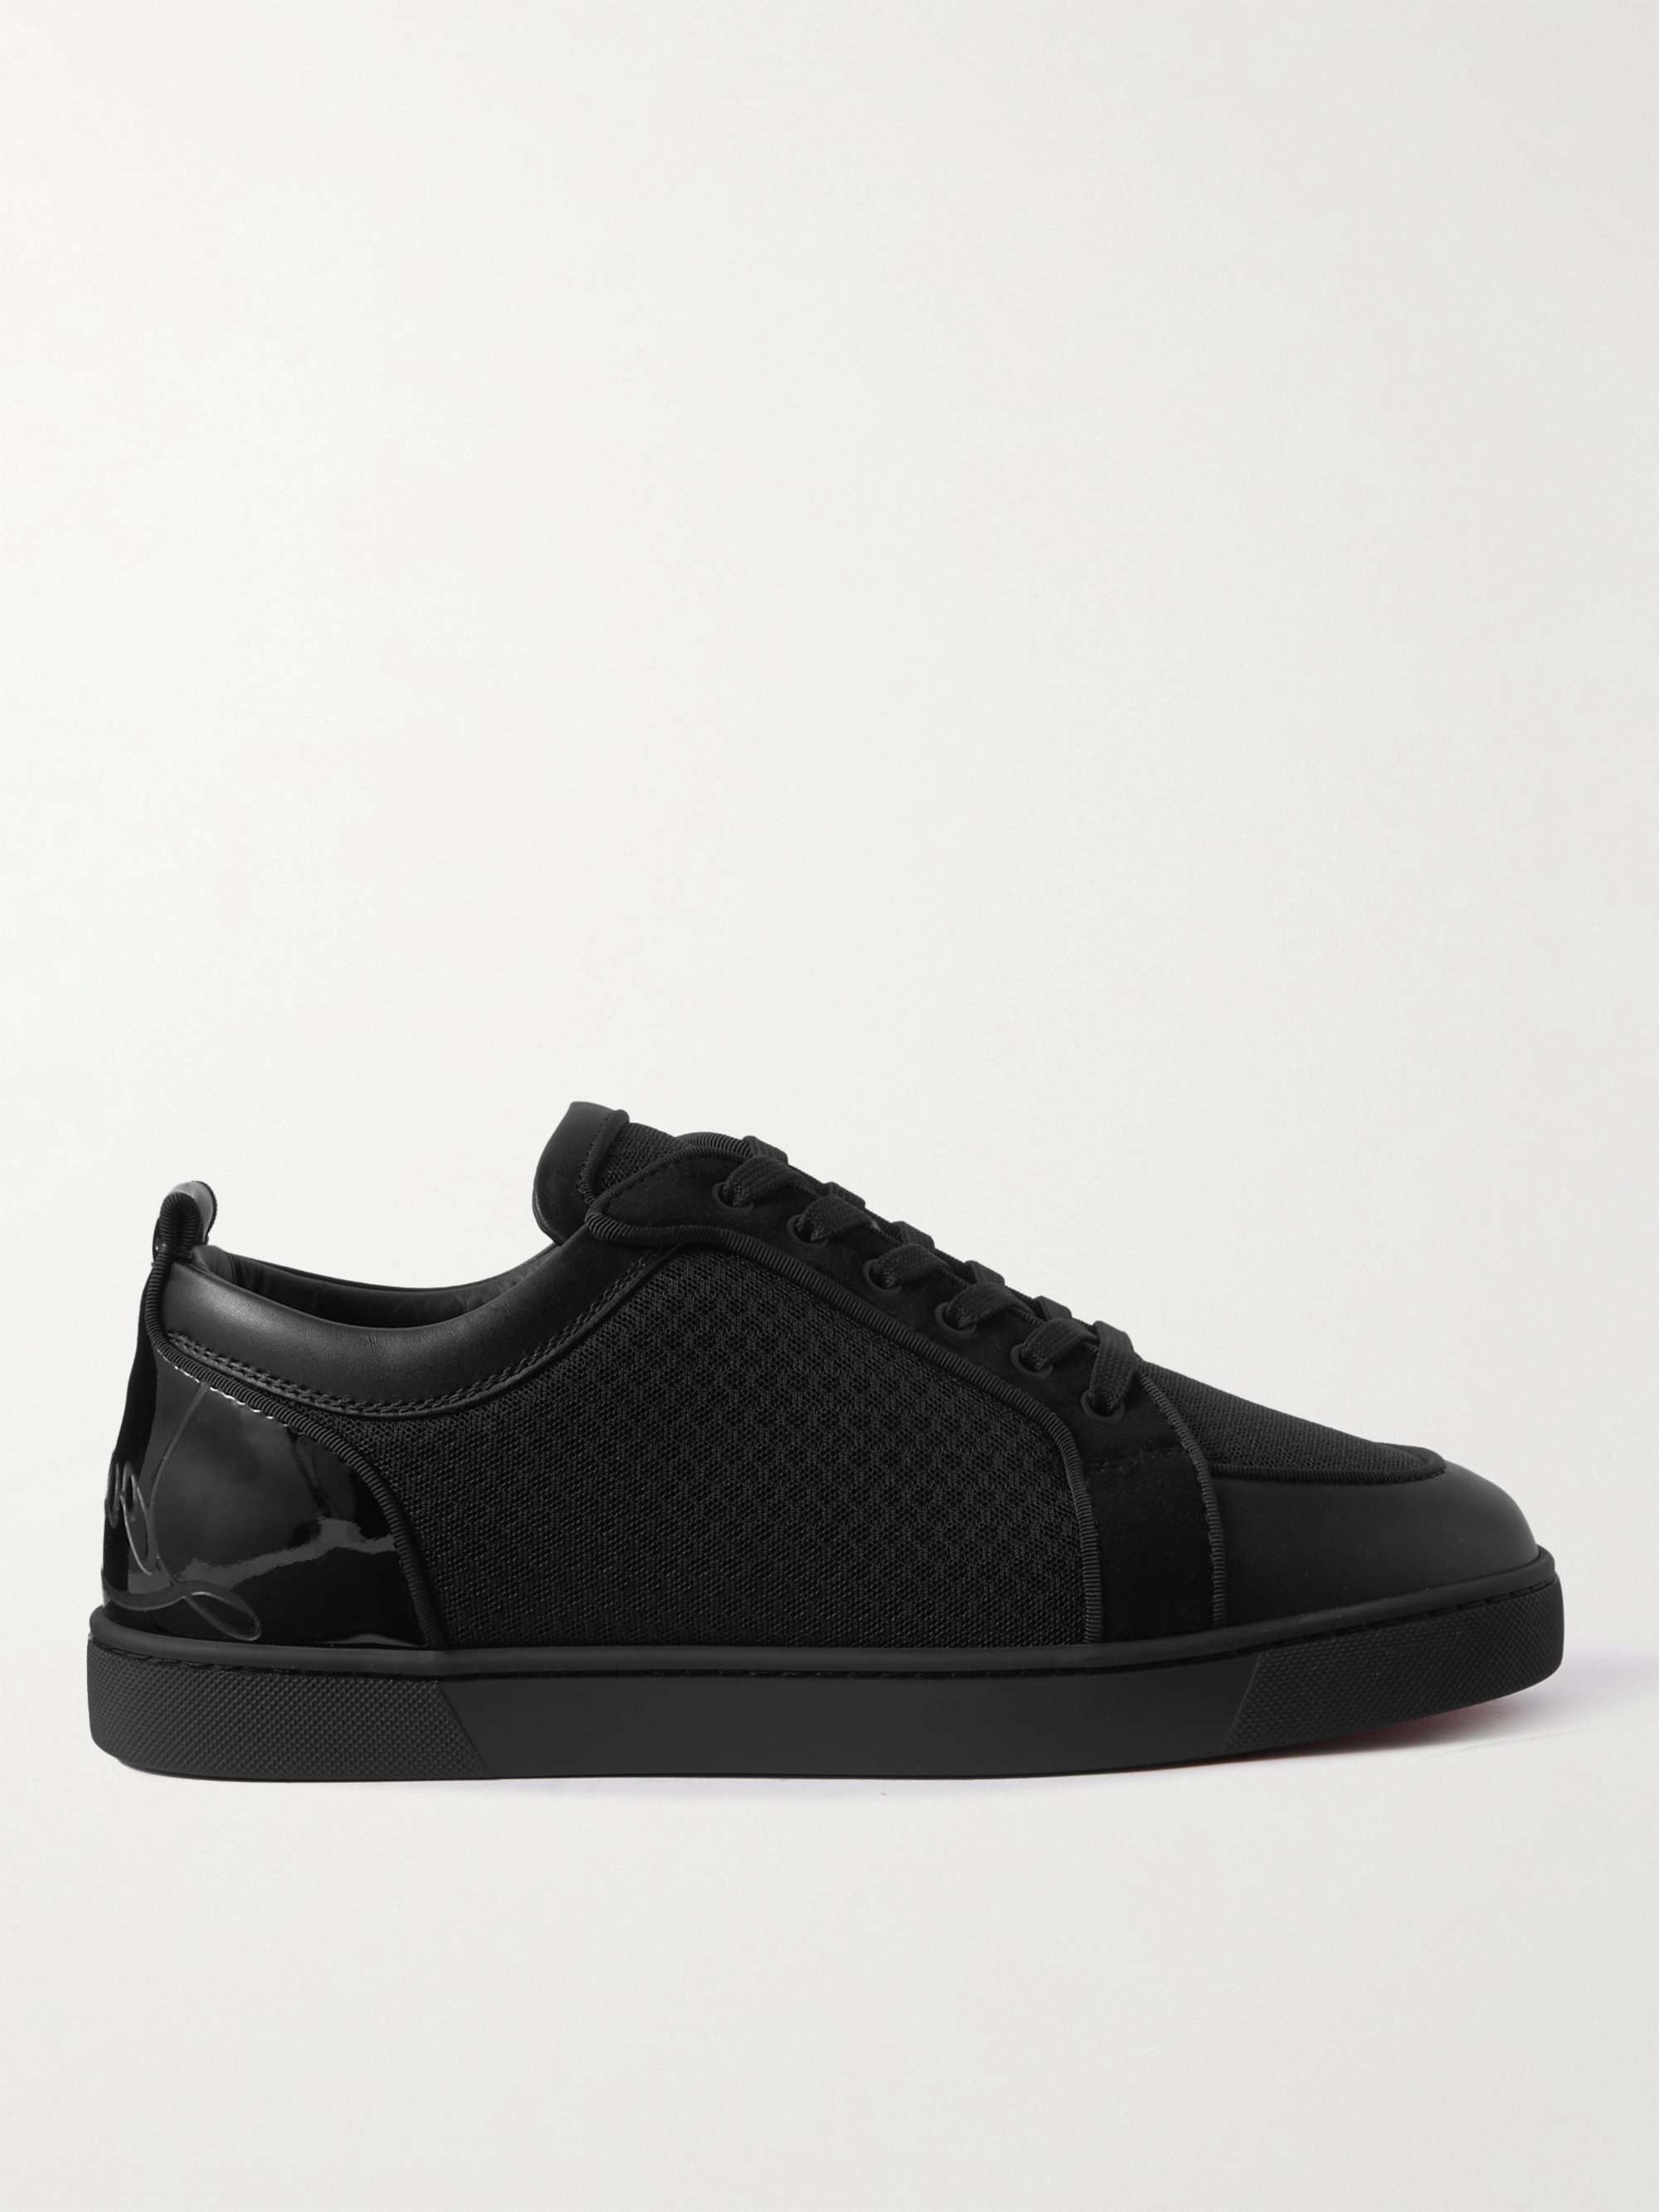 CHRISTIAN LOUBOUTIN Suede-Trimmed Leather and Mesh Sneakers | MR PORTER